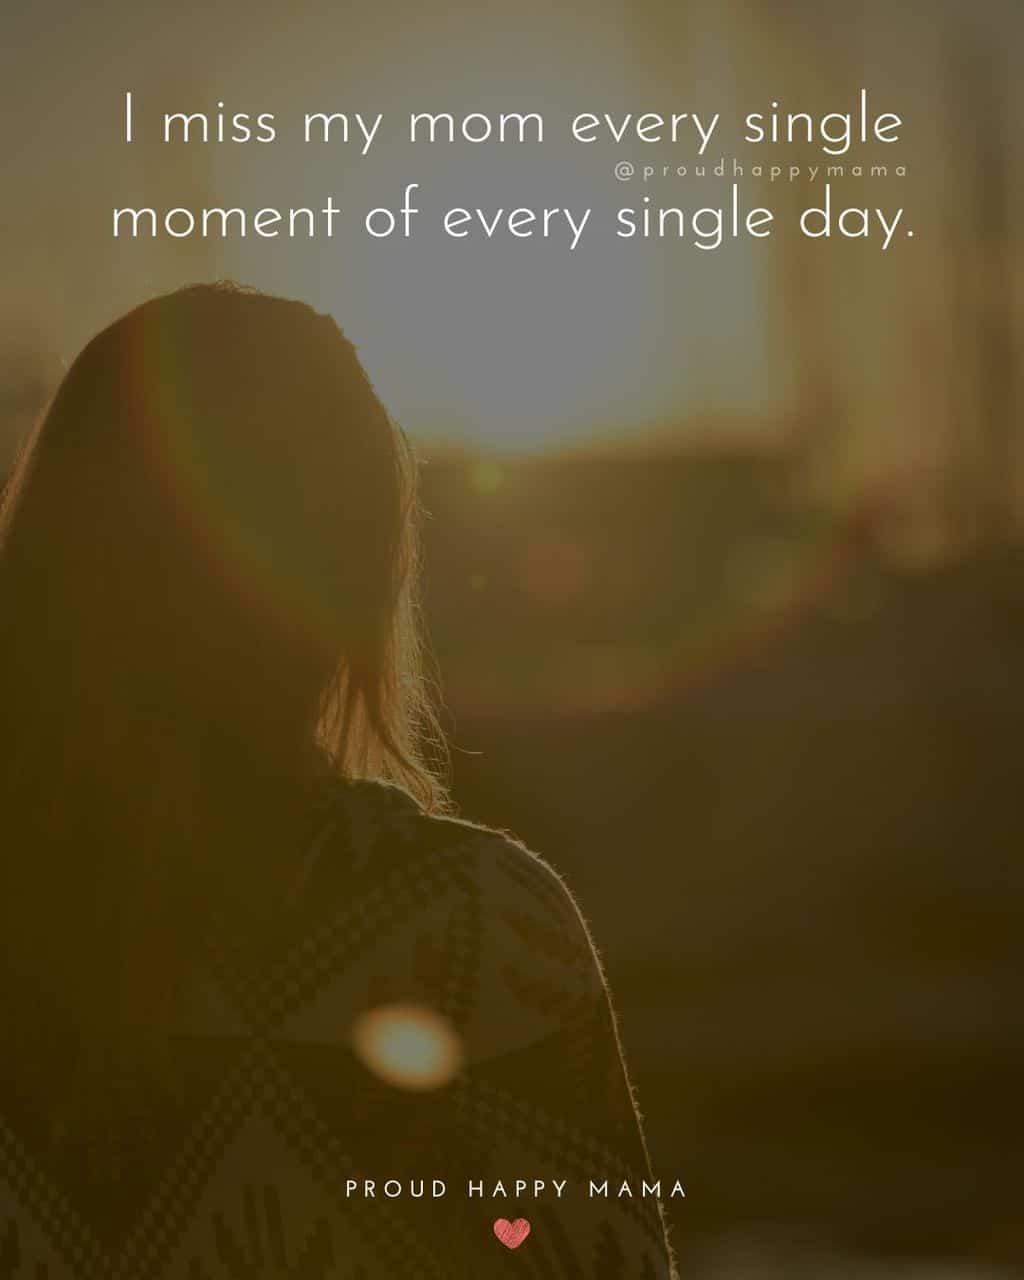 Daughter looking towards the sun with missing mom quote text overlay. 'I miss my mom every single moment of every single day.’